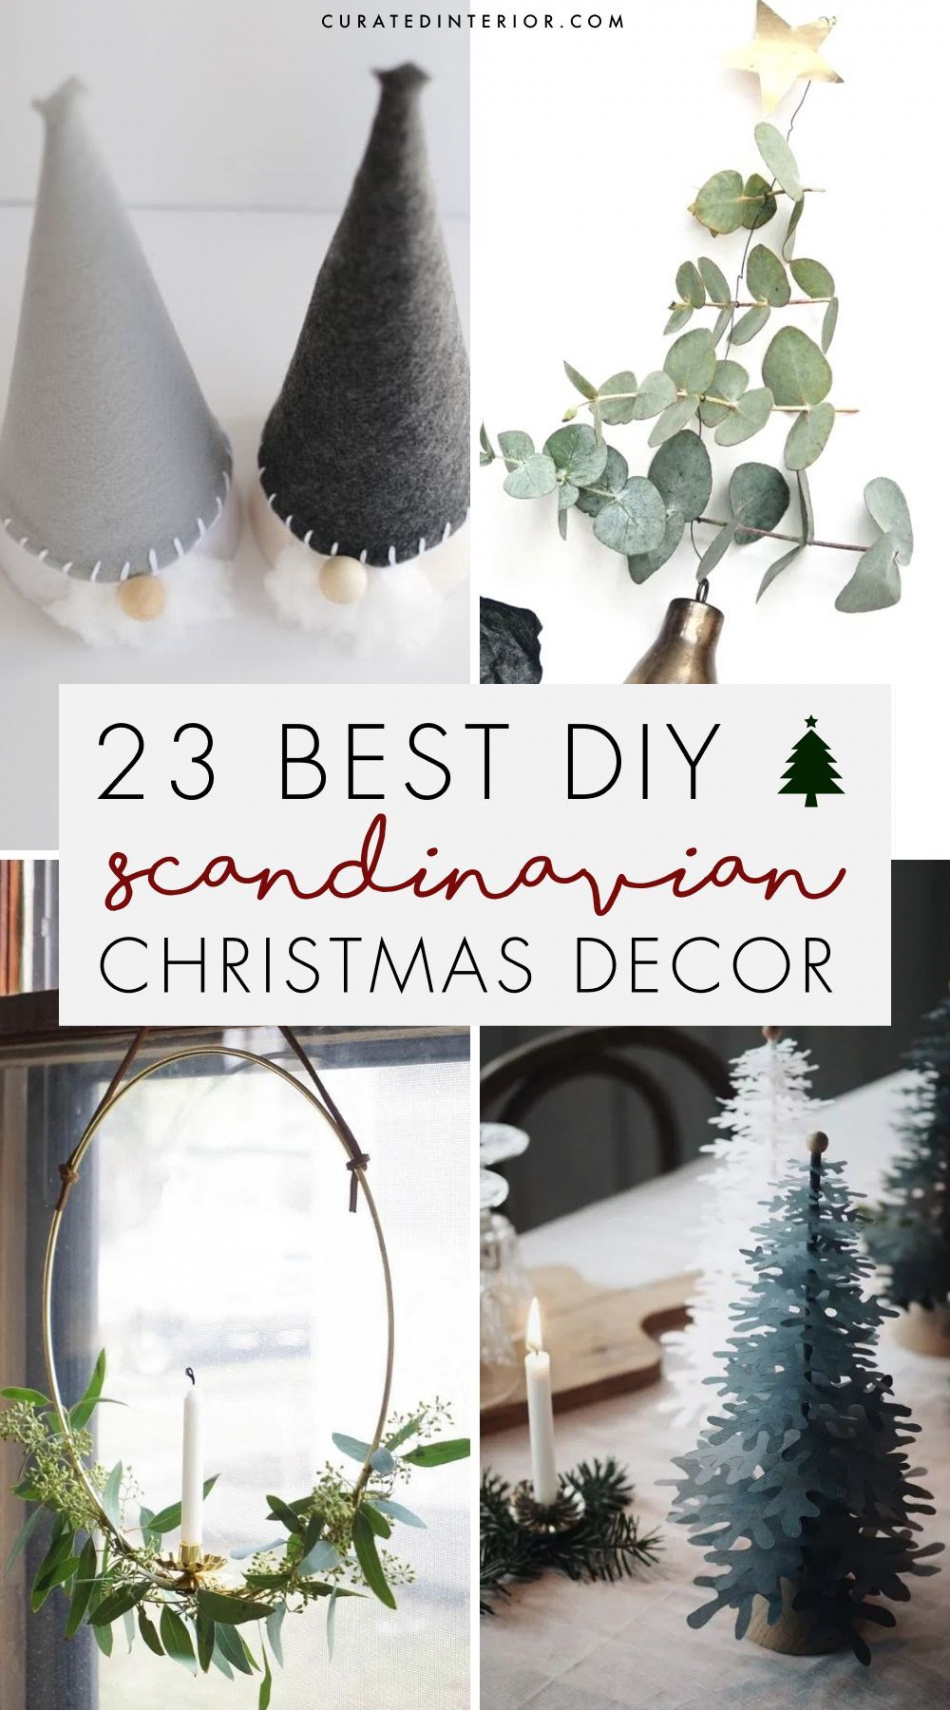 DIY Scandinavian Christmas Decorations with Nordic, Hygge Vibes